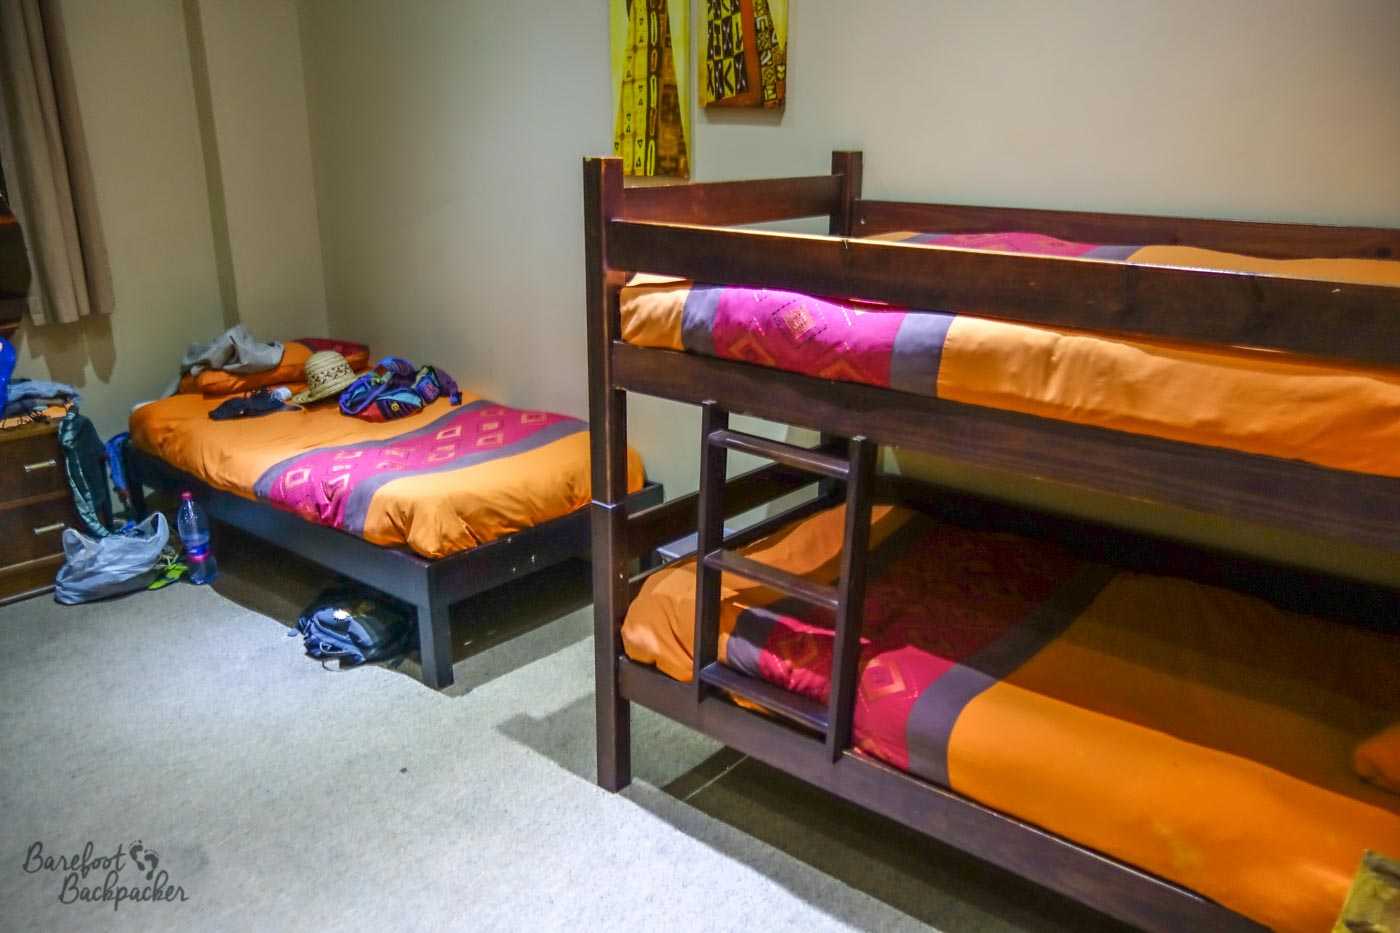 The minimalist but colourful scheme extended to the dorm rooms; here a bunk and a simple single bed lie along the wall, Orange is the dominant hue.